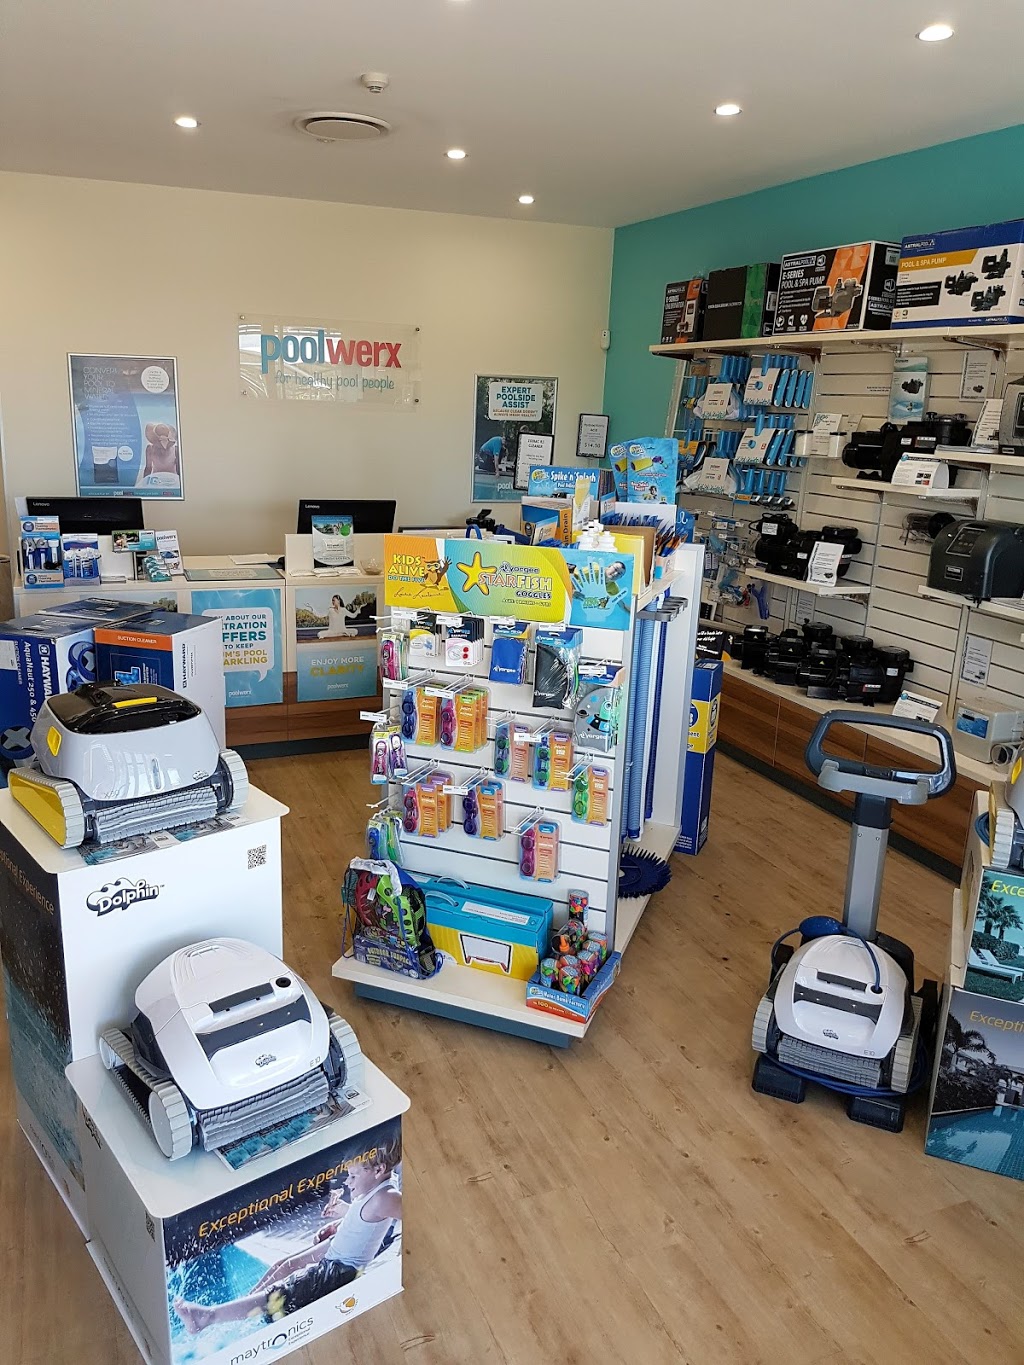 Poolwerx Nambour | store | Nambour Mill Village, Mill Ln, Nambour QLD 4560, Australia | 0754416515 OR +61 7 5441 6515